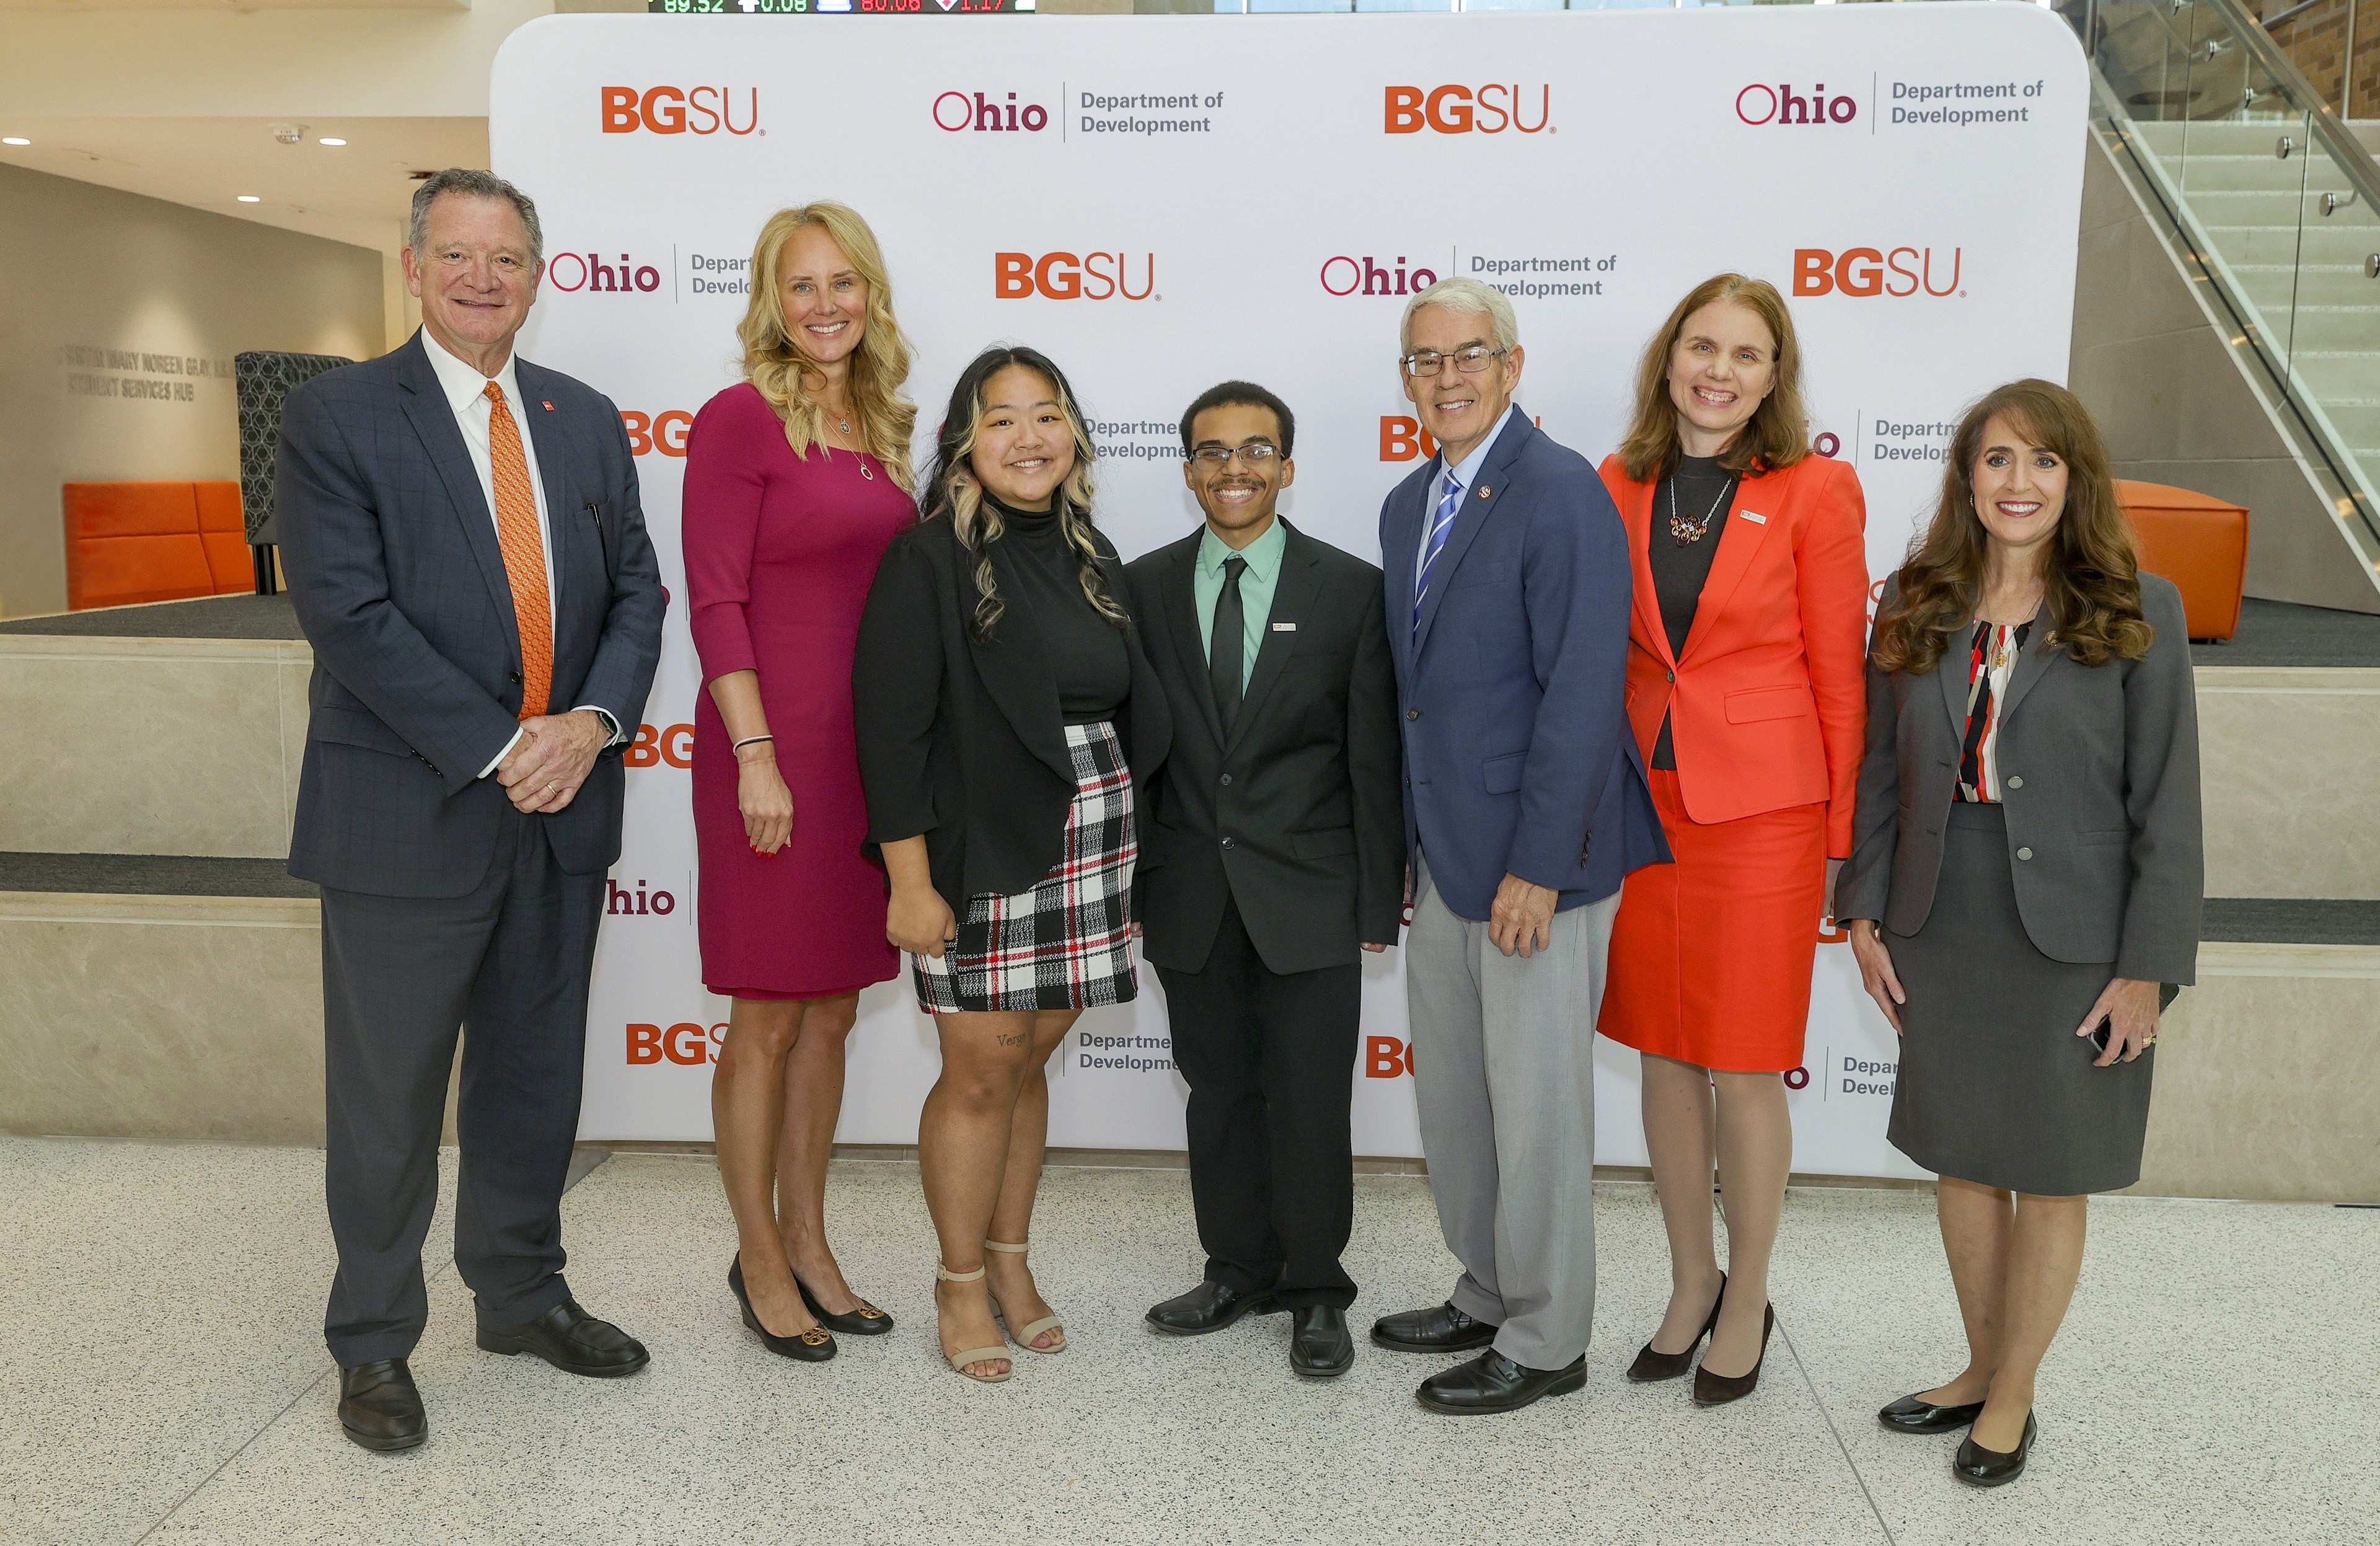 BGSU President Rodney K. Rogers, Schmidthorst College of Business Dean Dr. Jennifer Percival, students and Ohio state leaders gather for a photo to dedicate the University's partnership with the Ohio Export Internship Program.